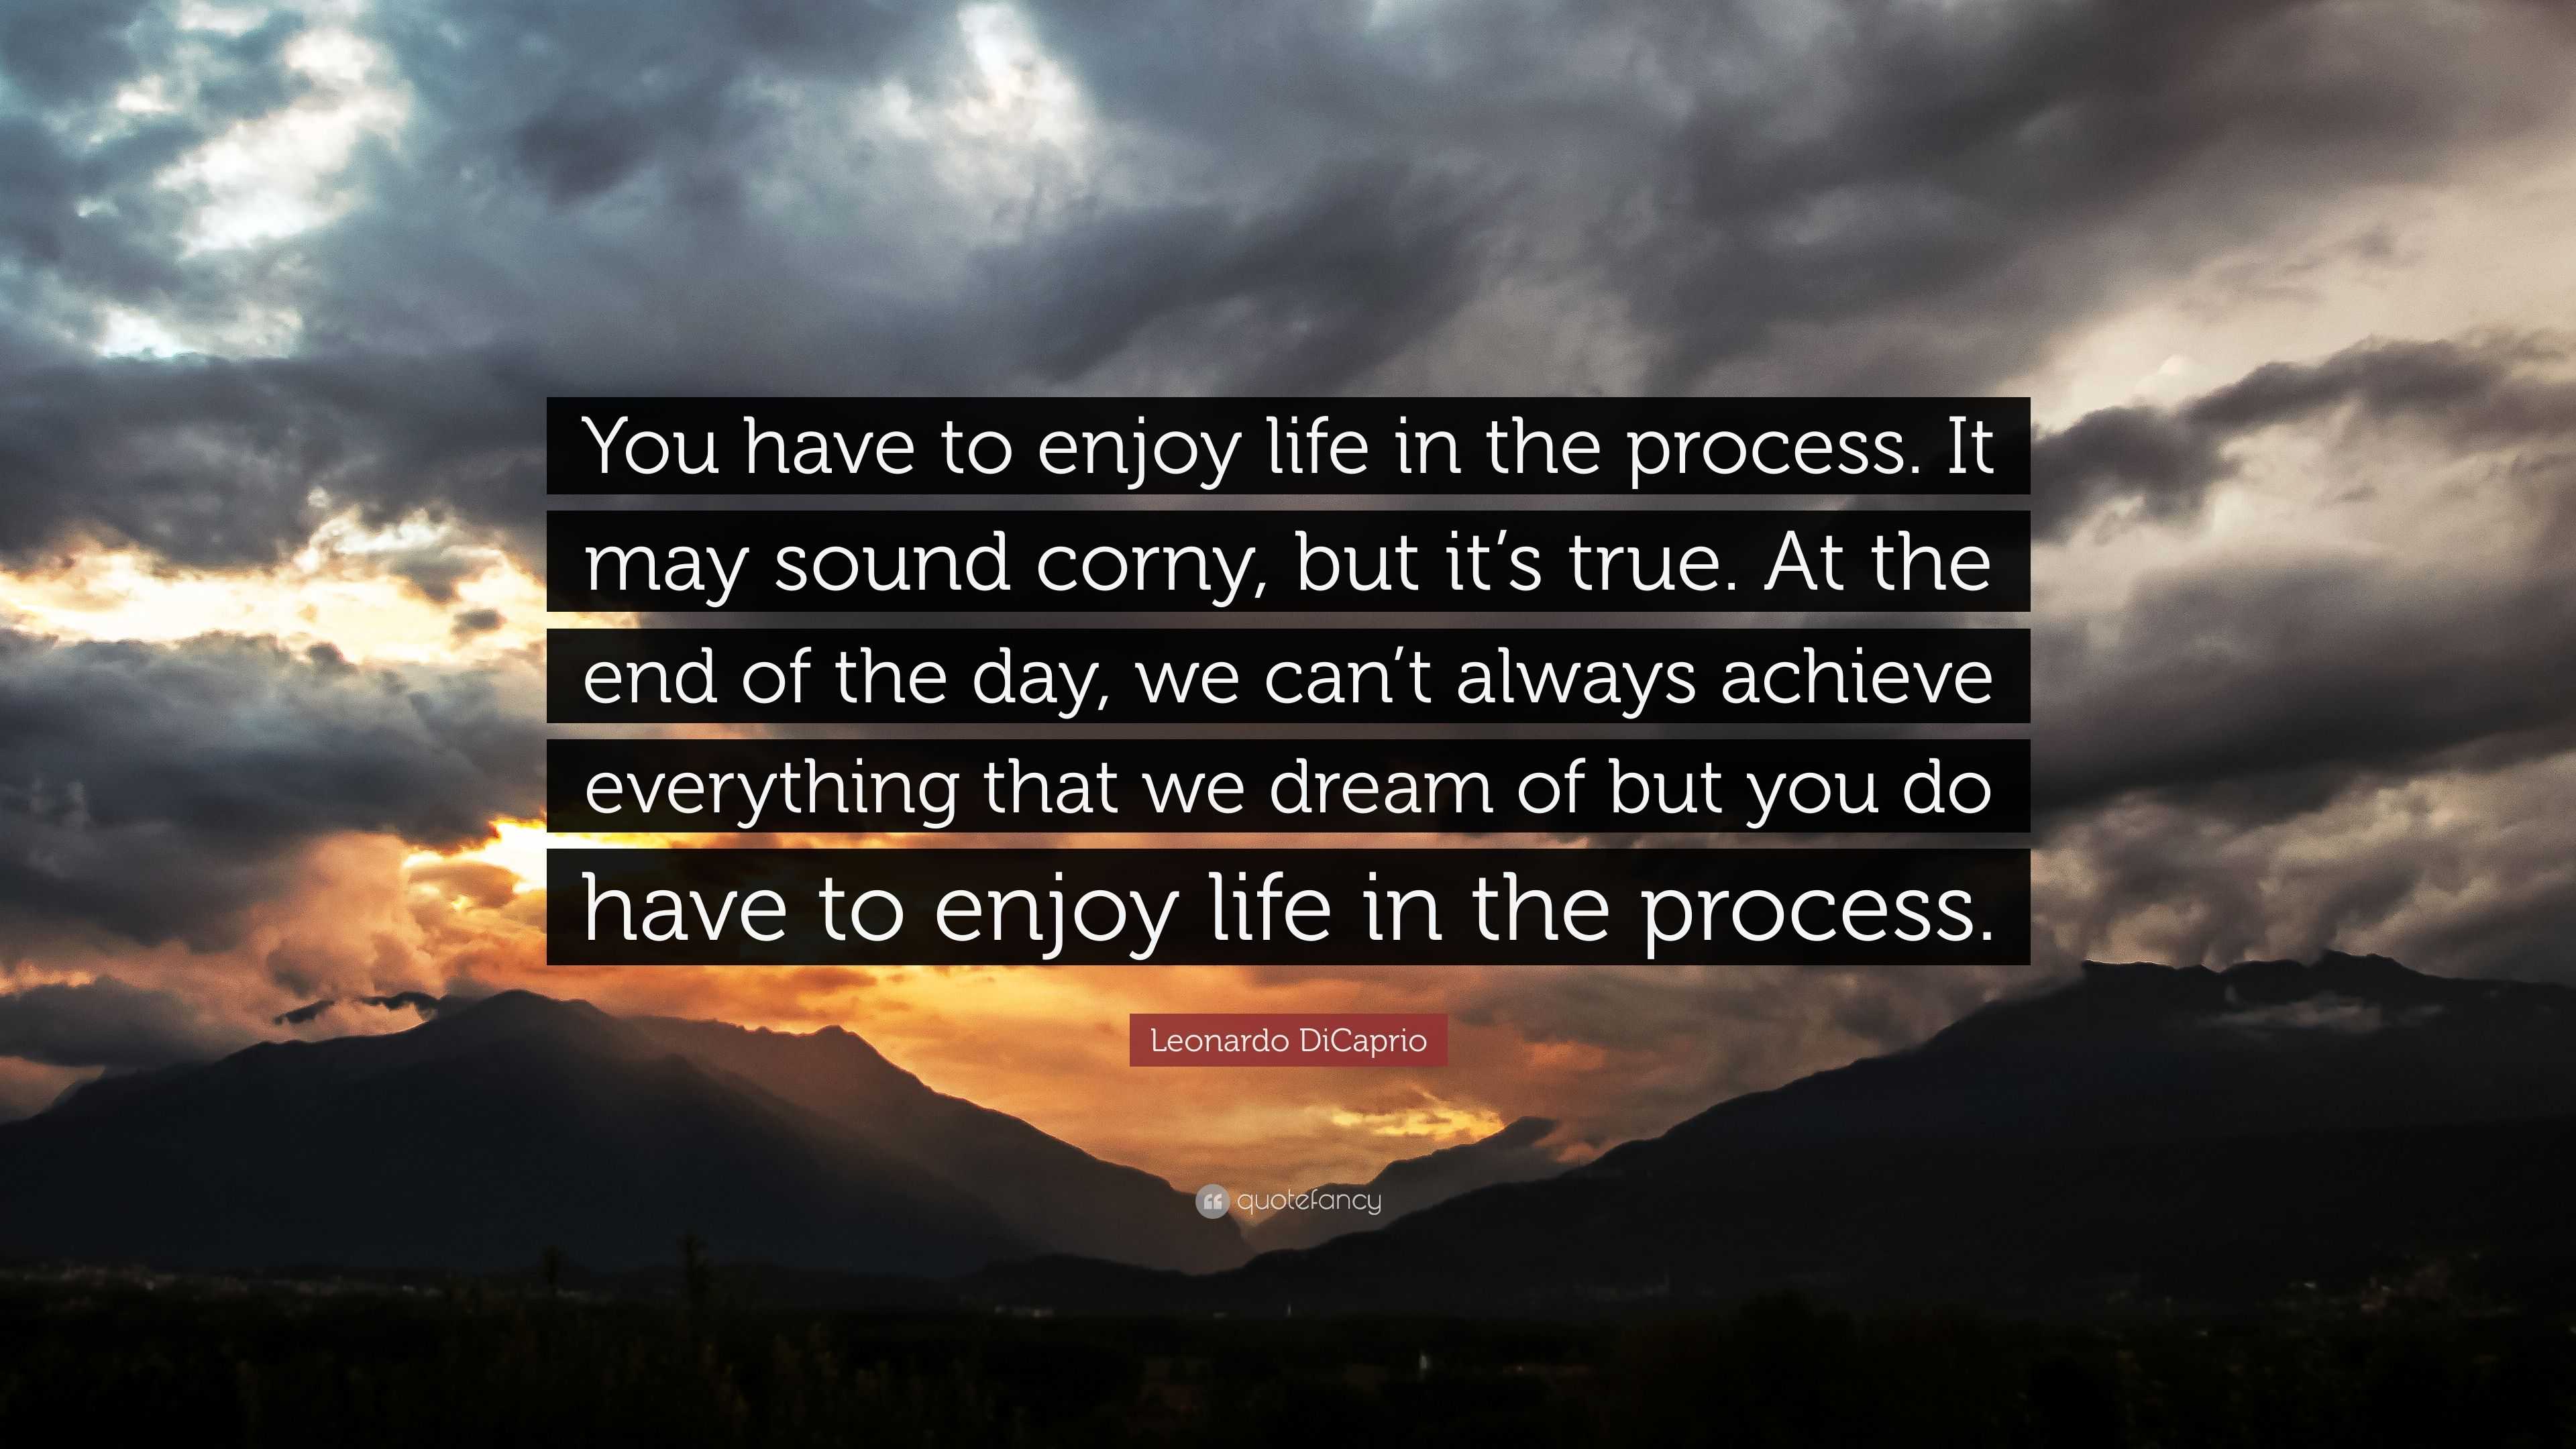 Leonardo DiCaprio Quote “You have to enjoy life in the process It may